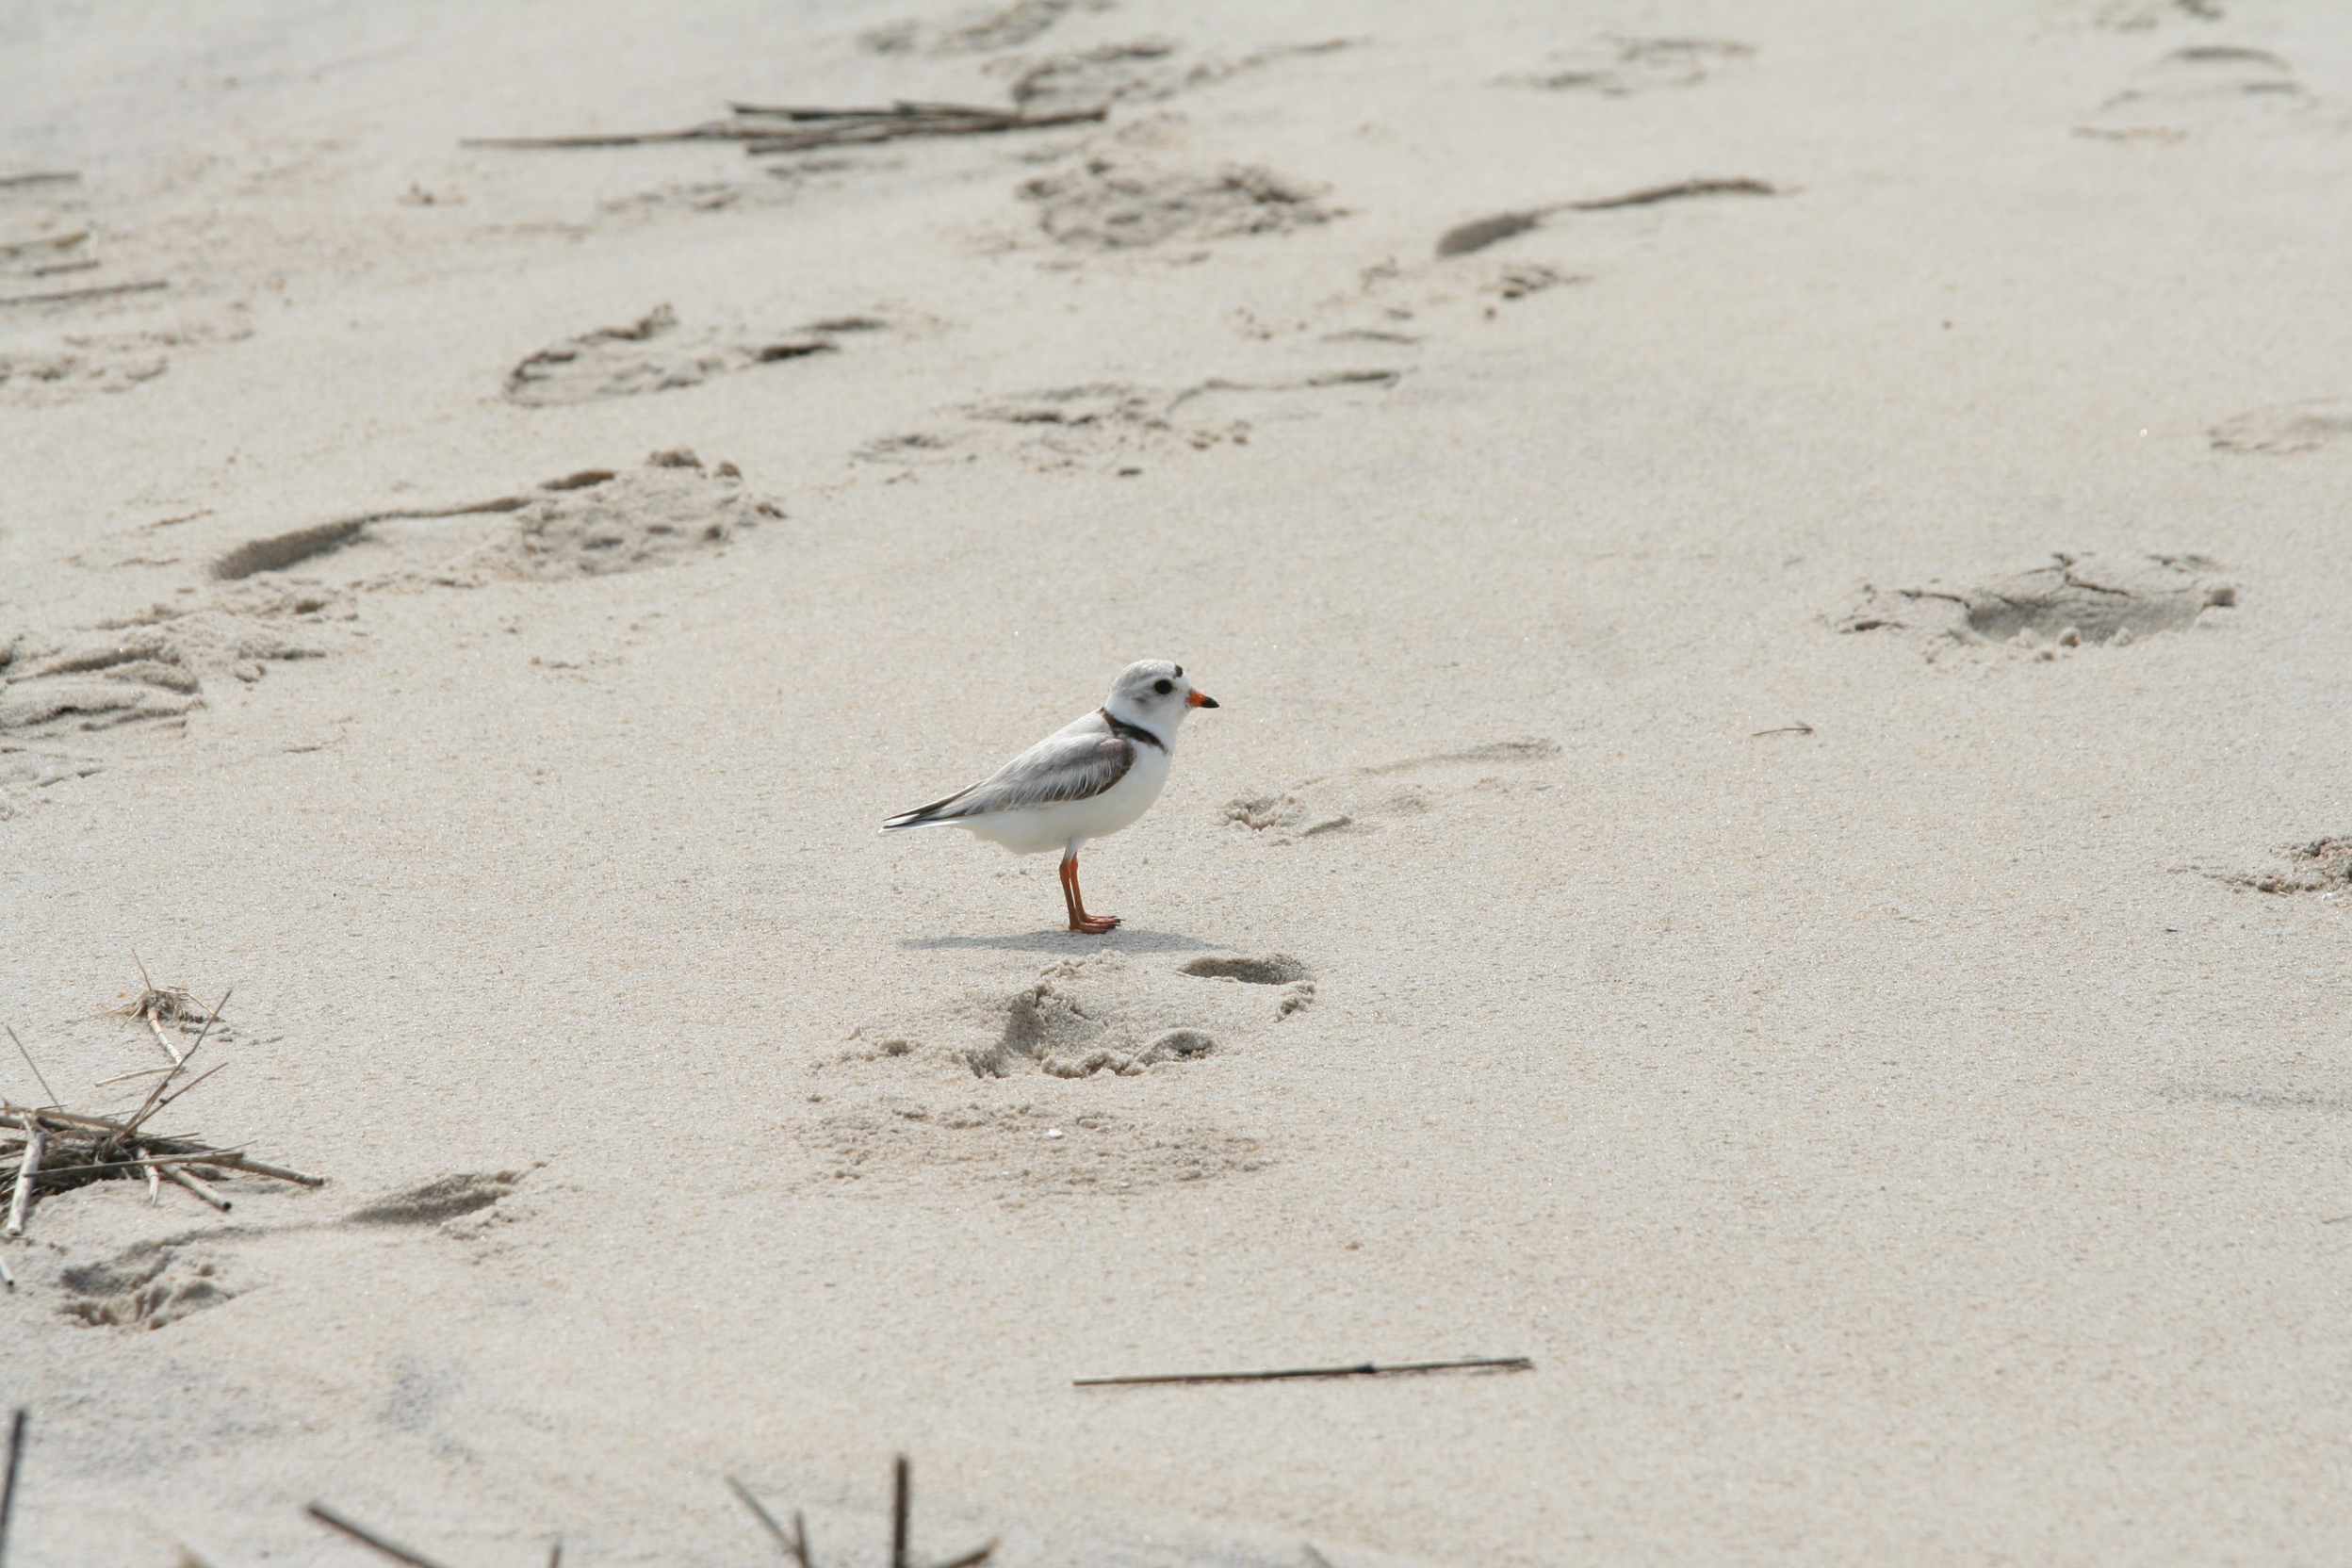 A piping plover on a beach